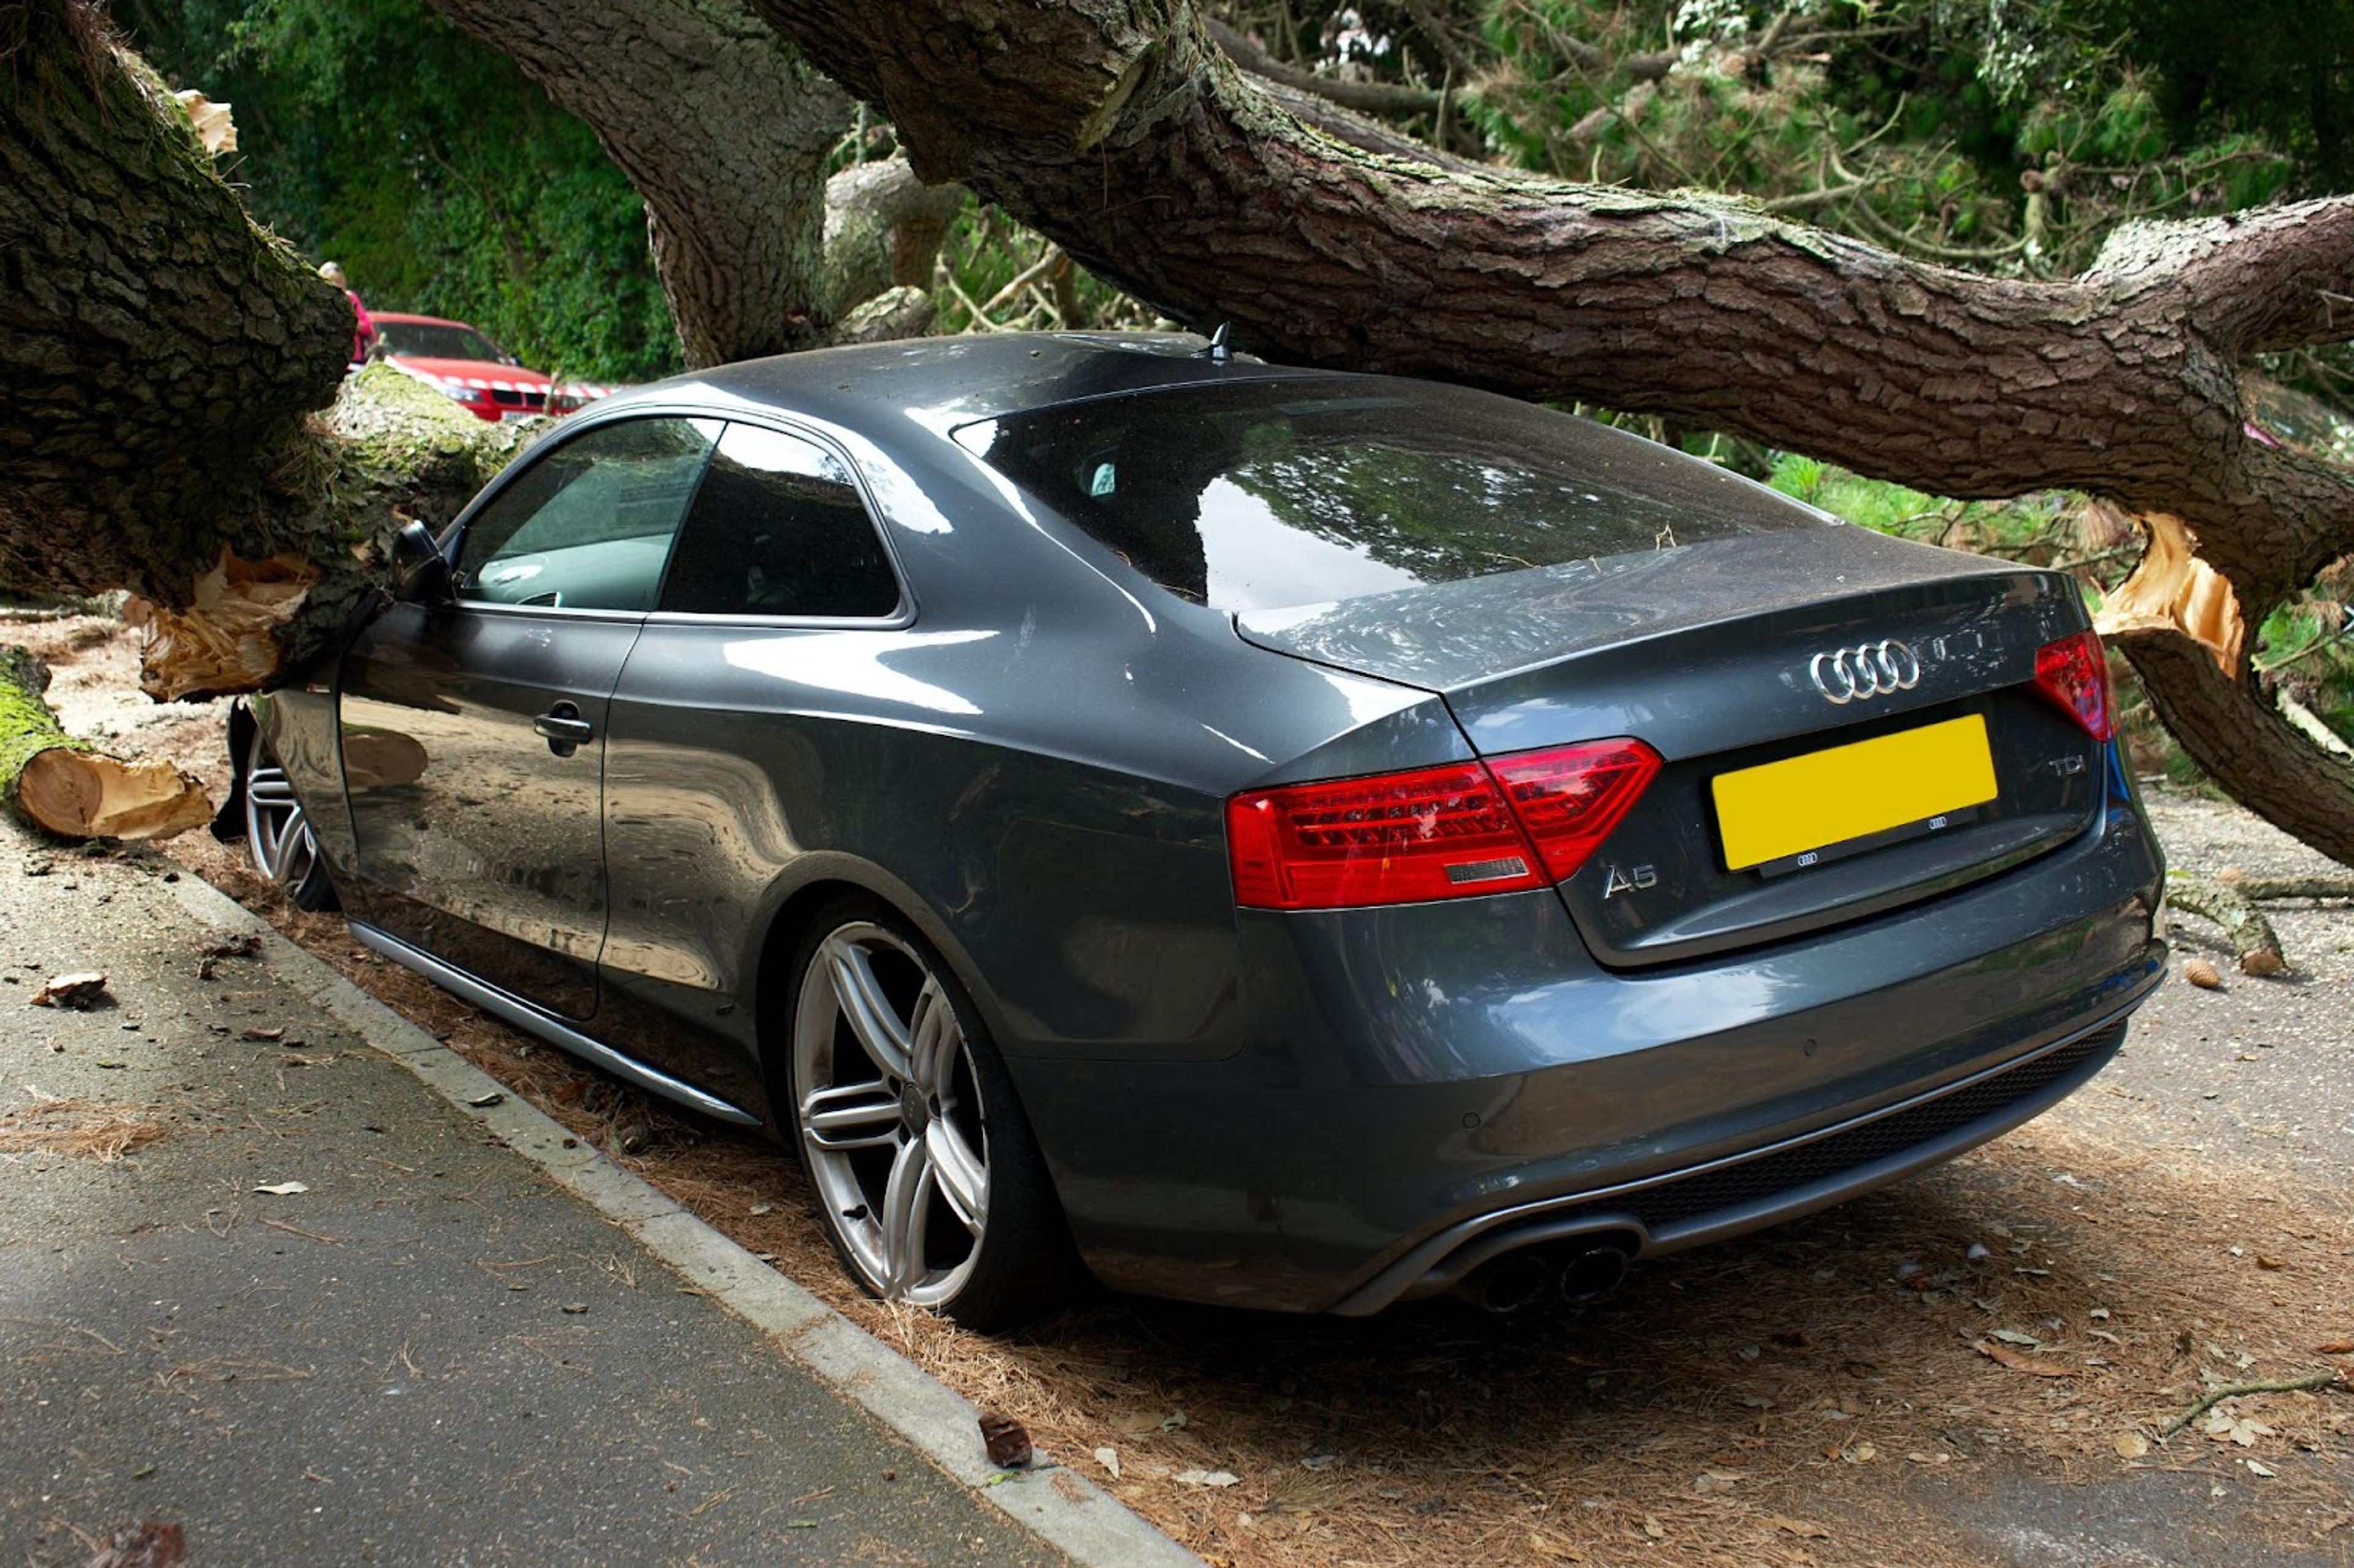 Audi coupe car crashed into a tree in the result of natural disaster